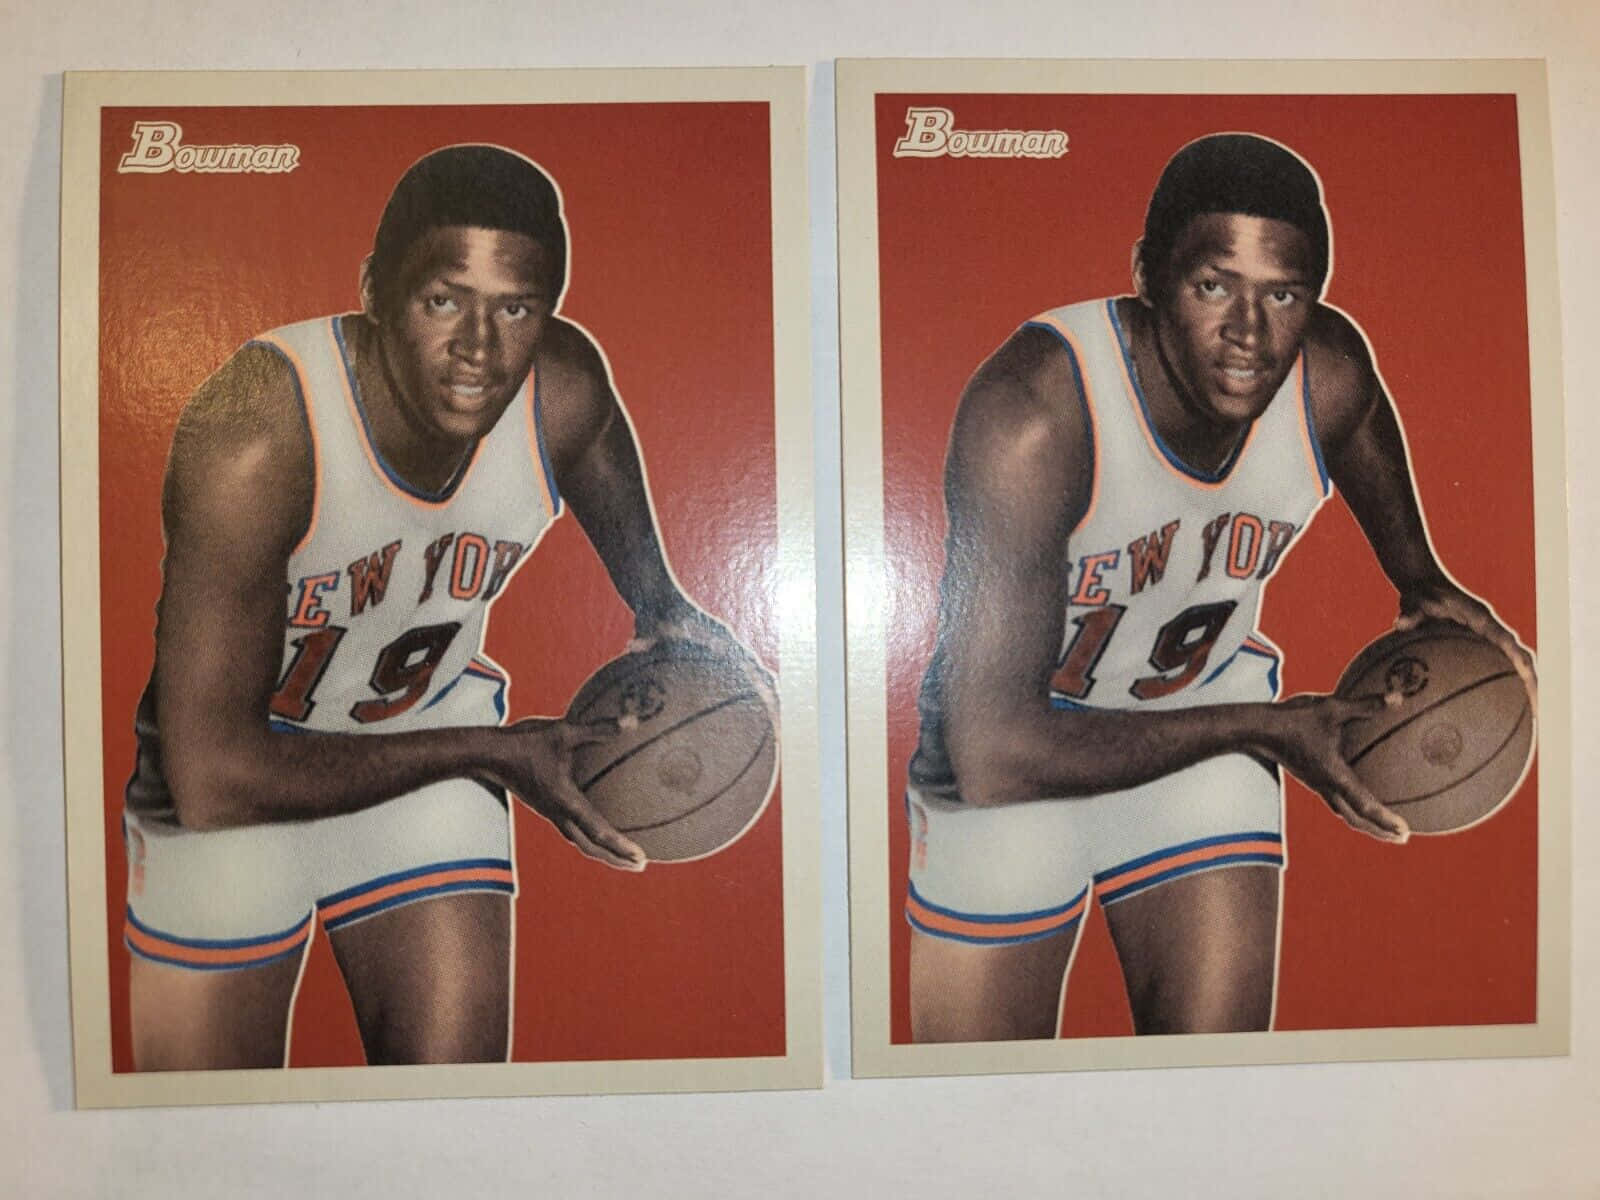 Bowman Cards Of Willis Reed Wallpaper